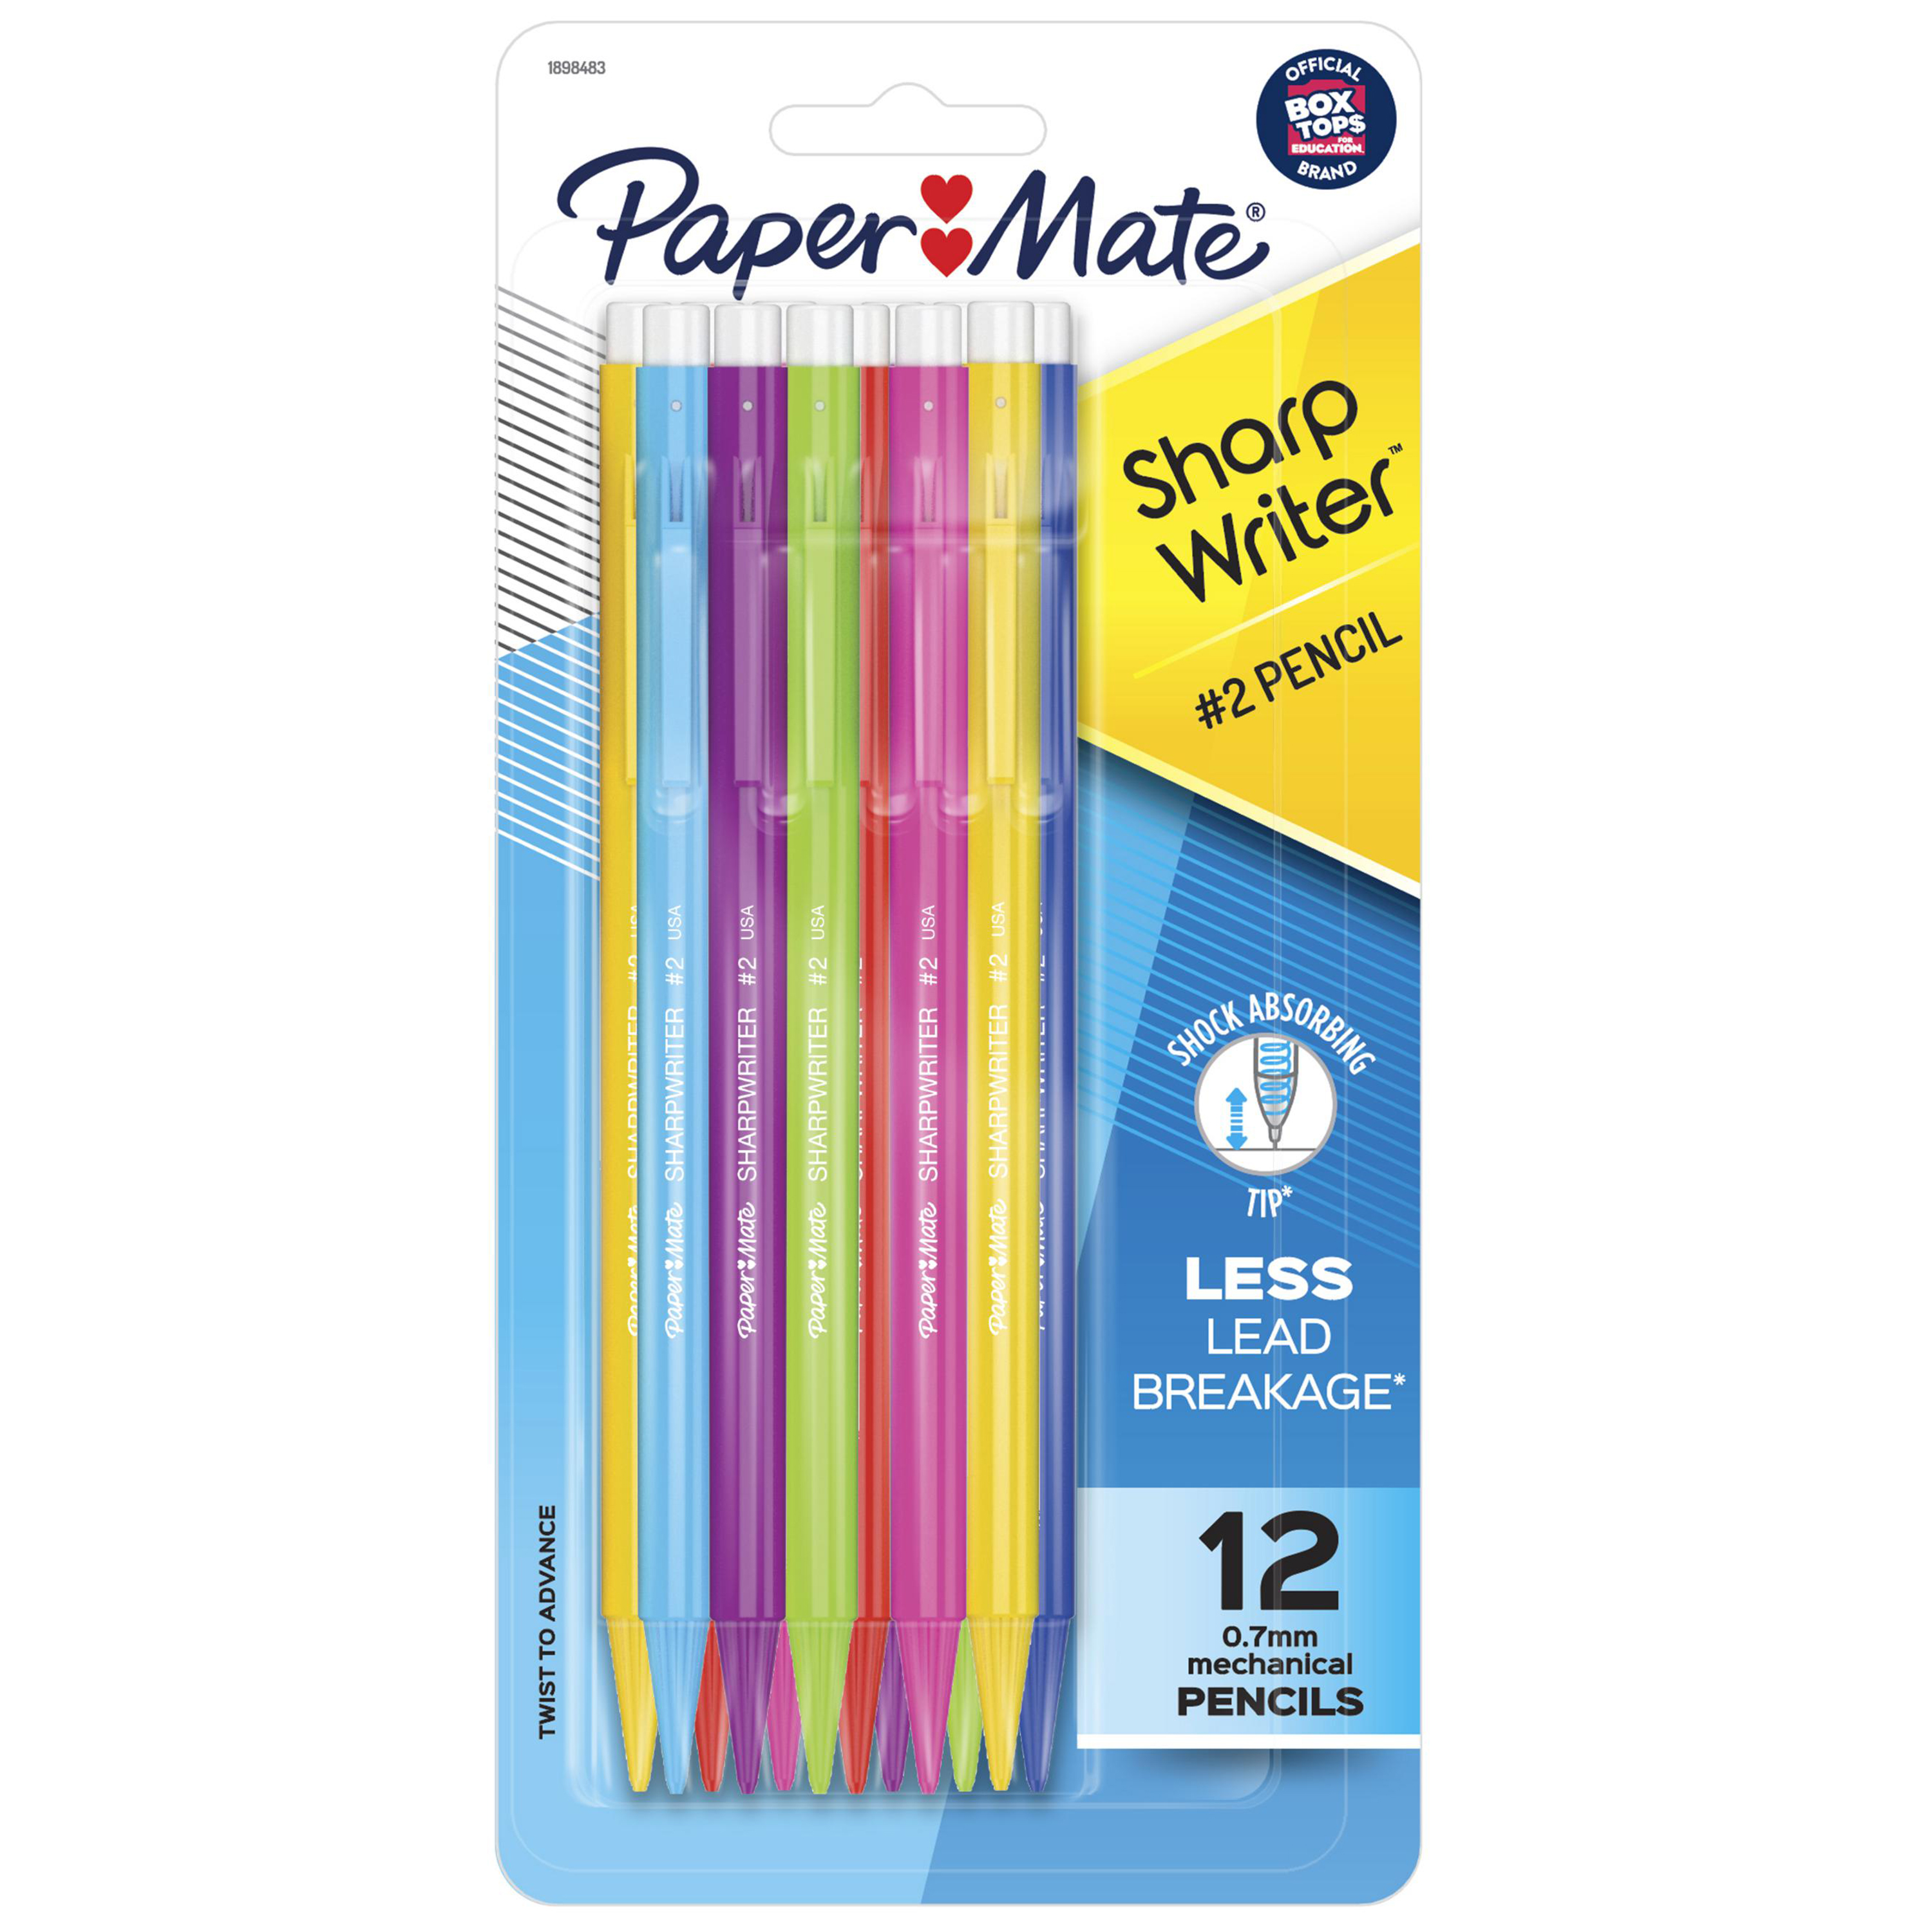 12-Count Paper Mate SharpWriter Mechanical Pencils 0.7 mm HB #2 Lead (Assorted Colors) $2.97 + Free Store Pickup at Walmart